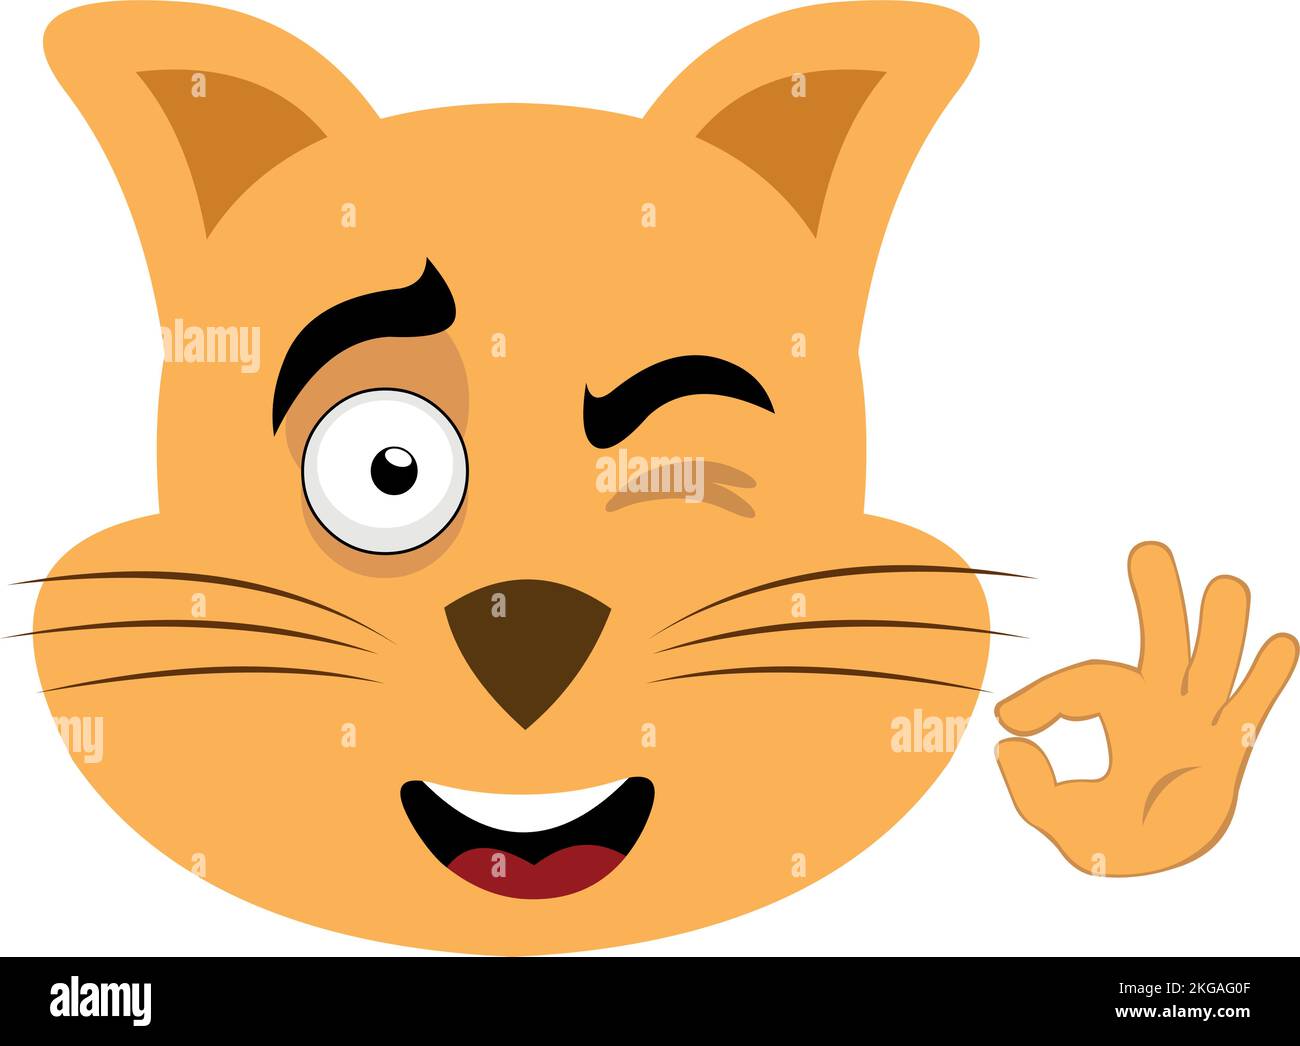 Vector illustration of the face of a cartoon cat with a cheerful expression, winking eye and making the classic gesture with his hand of ok or perfect Stock Vector